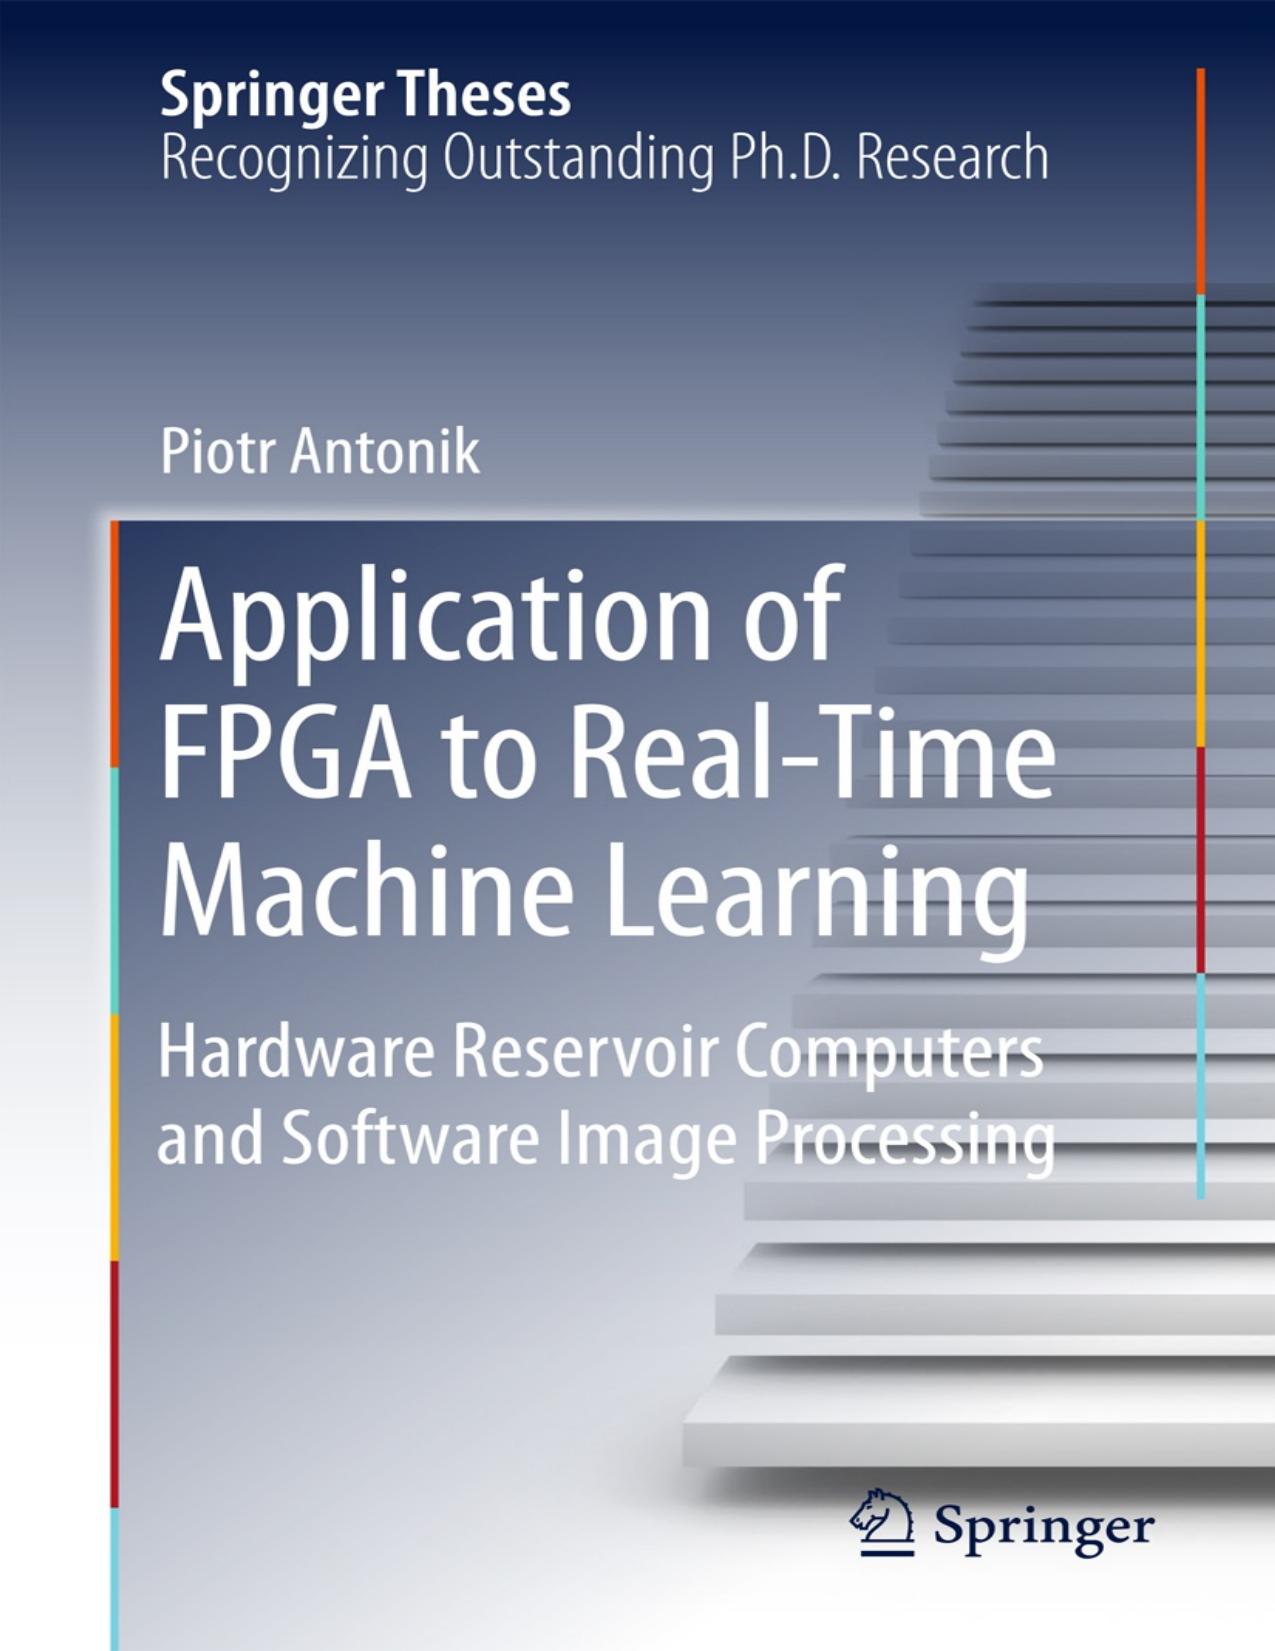 Application of FPGA to Real-Time Machine Learning.jpg